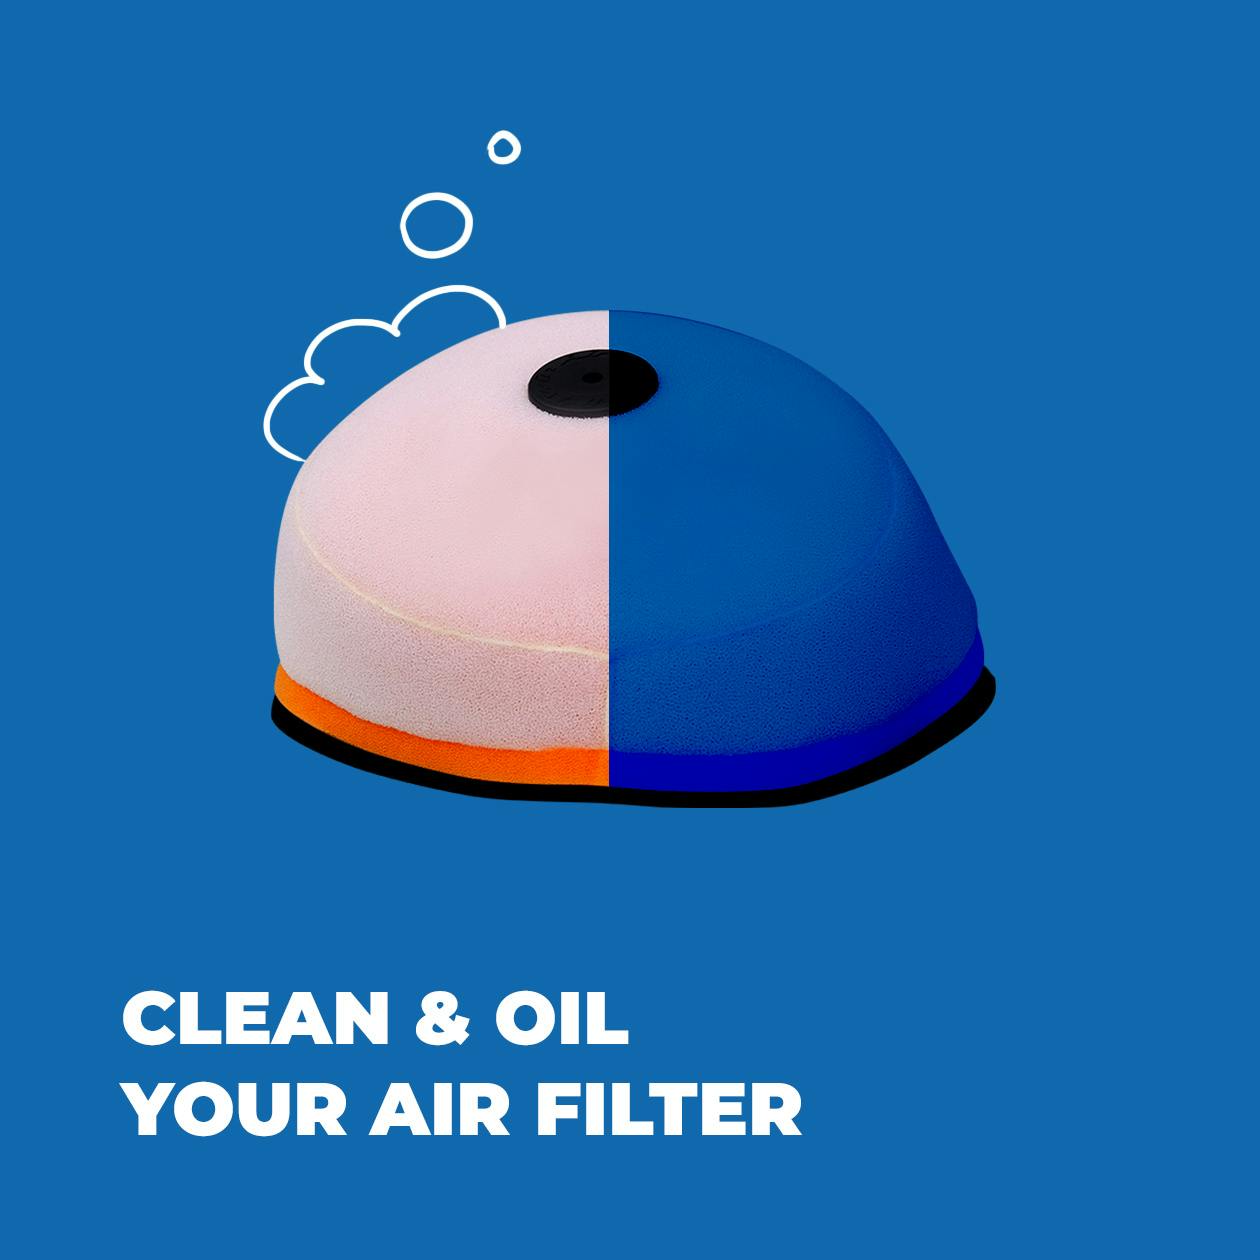 Clean and oil your air filter